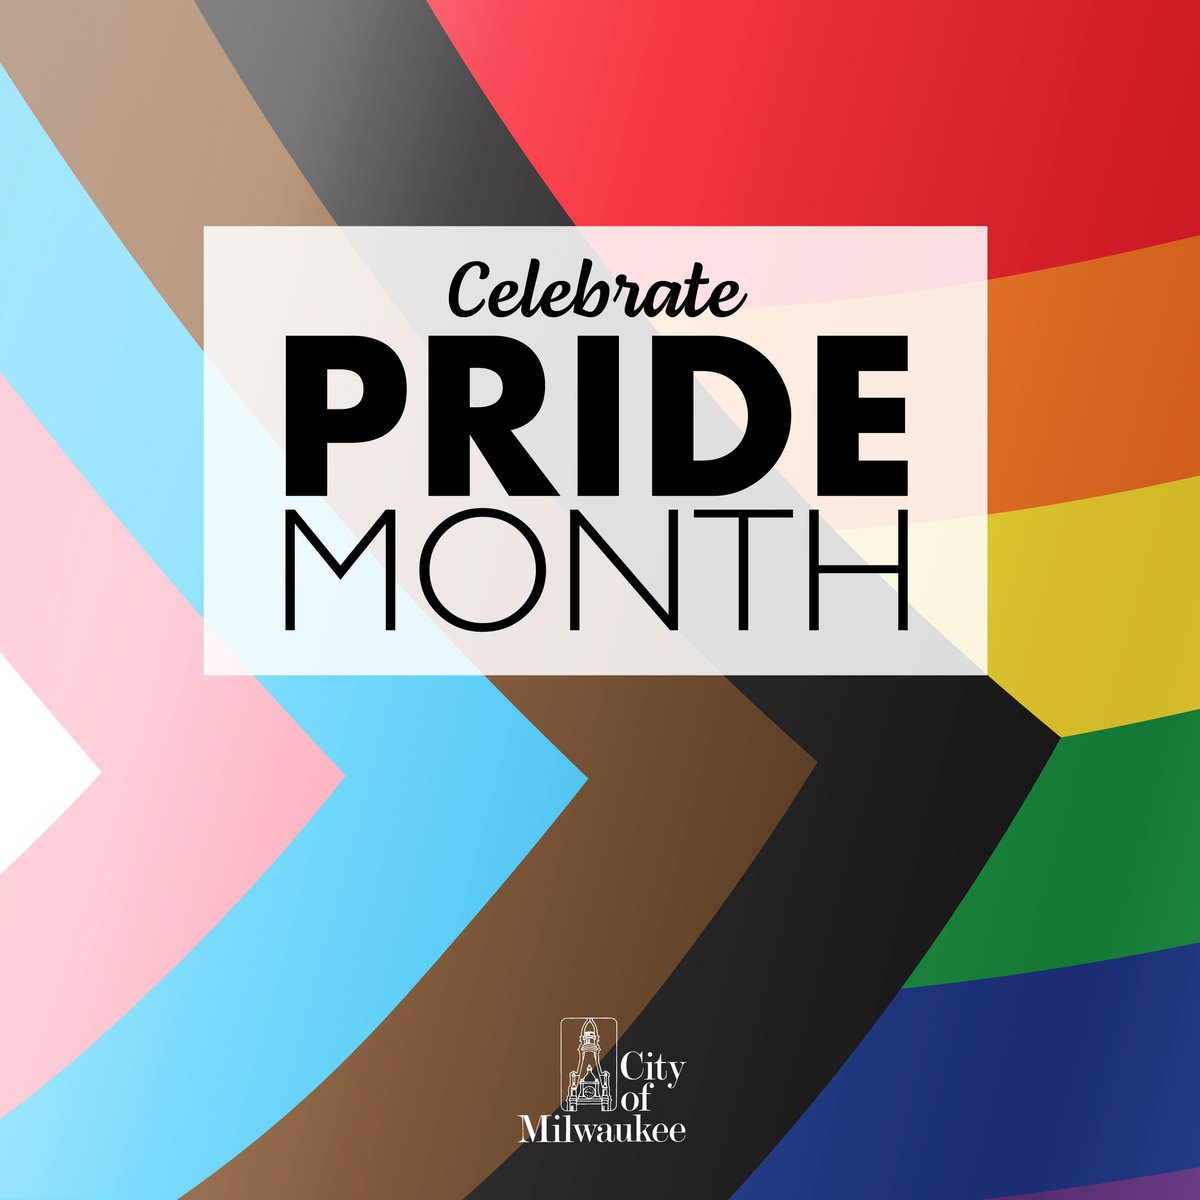 Happy #Pride Month, Milwaukee! The City of Milwaukee is proud to celebrate the diversity, openness, humanity, and love of our community, as we continue working to make Milwaukee more inclusive, welcoming, and safe for everyone. #PrideMonth2024